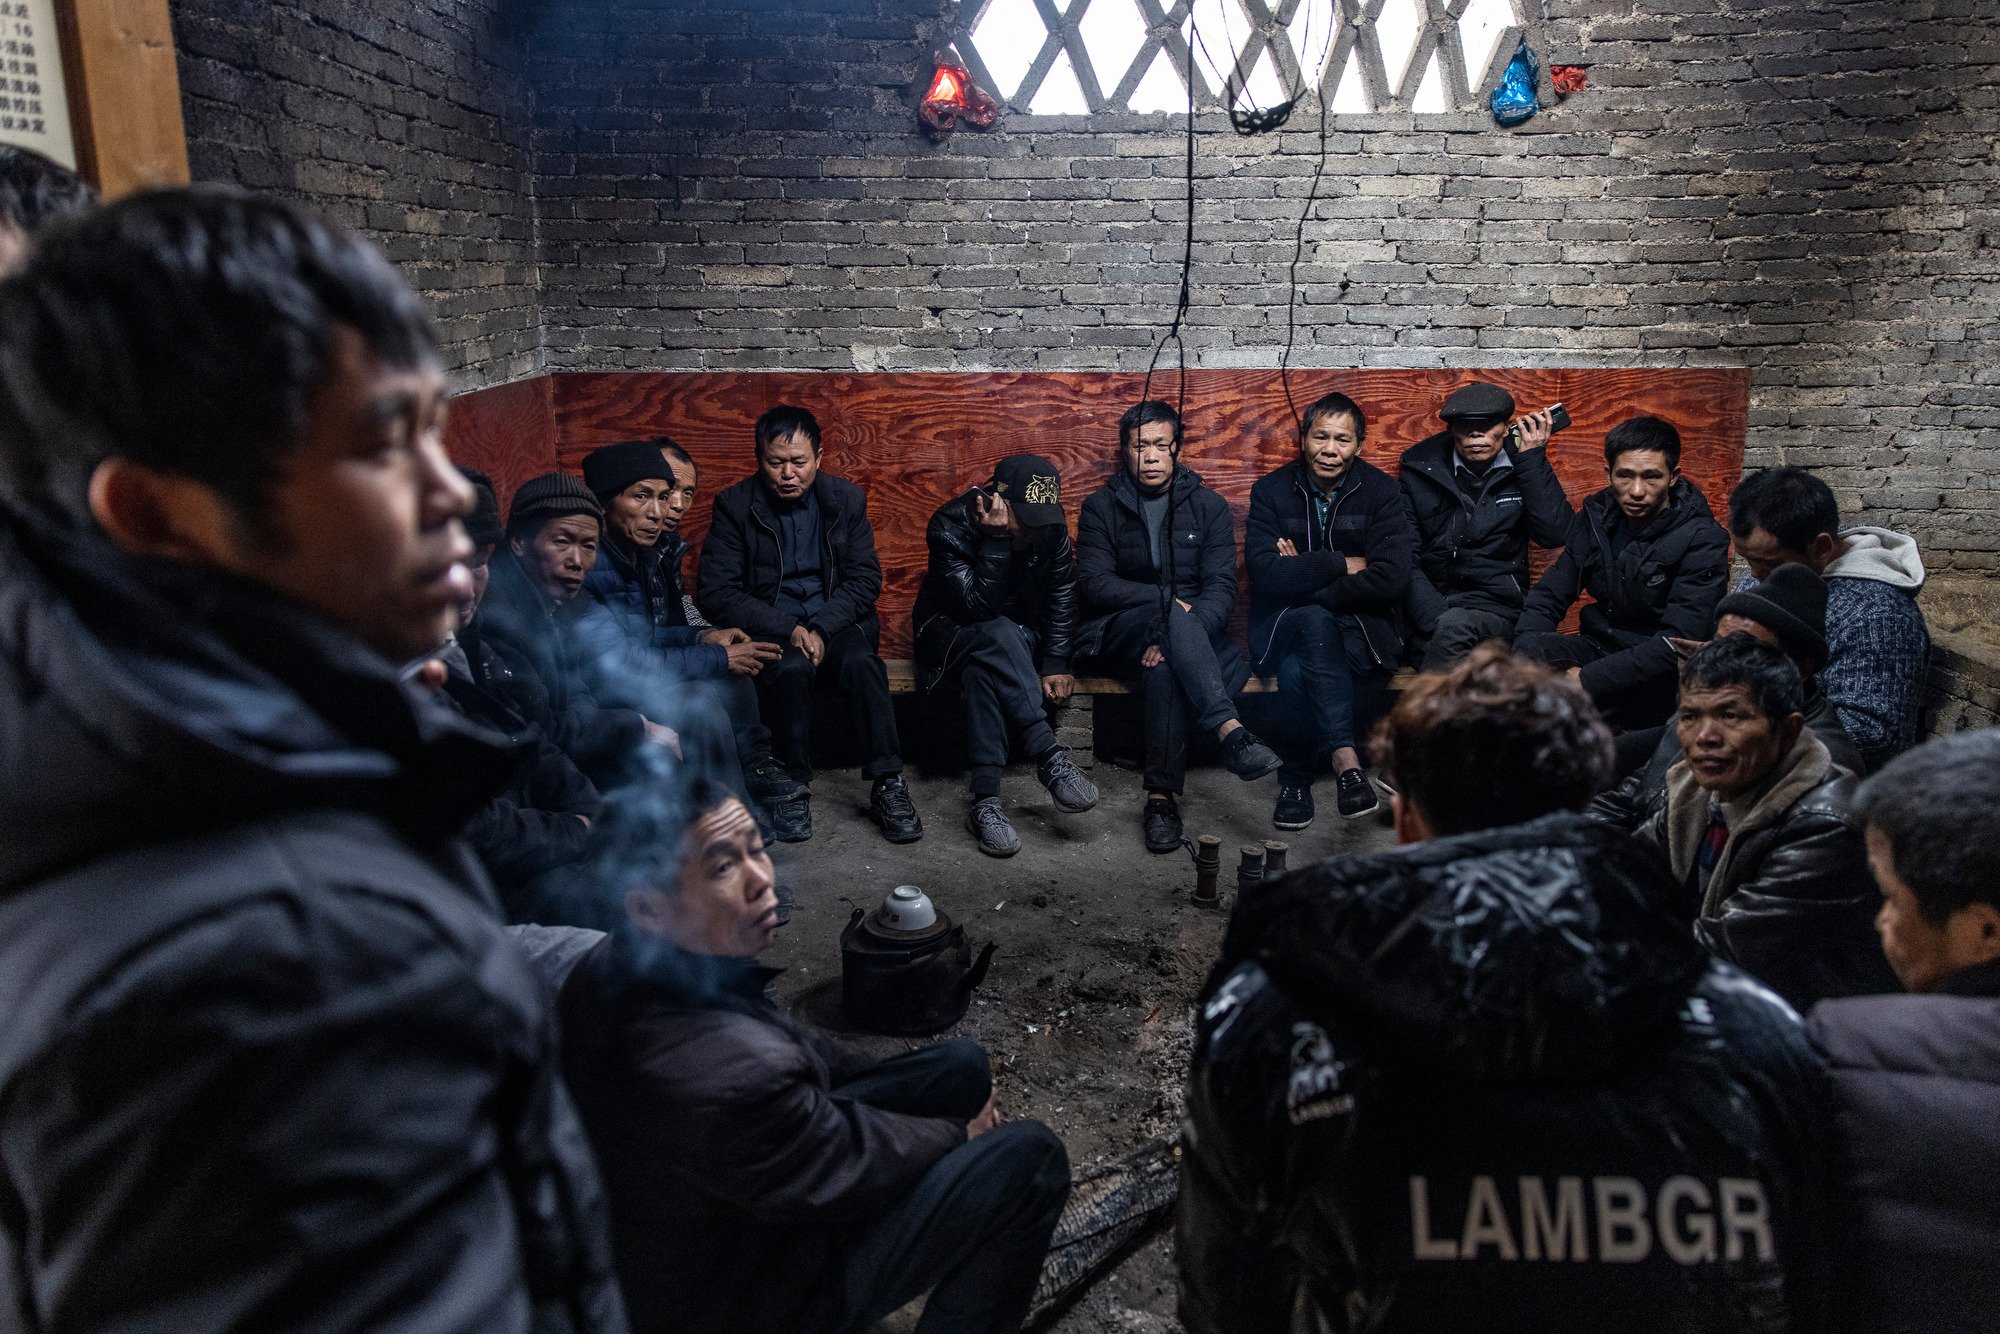  The village elders gather around a fire in the buffalo shack on the day the buffalo leaves to the fight. Zhengying village in Guizhou, China. 